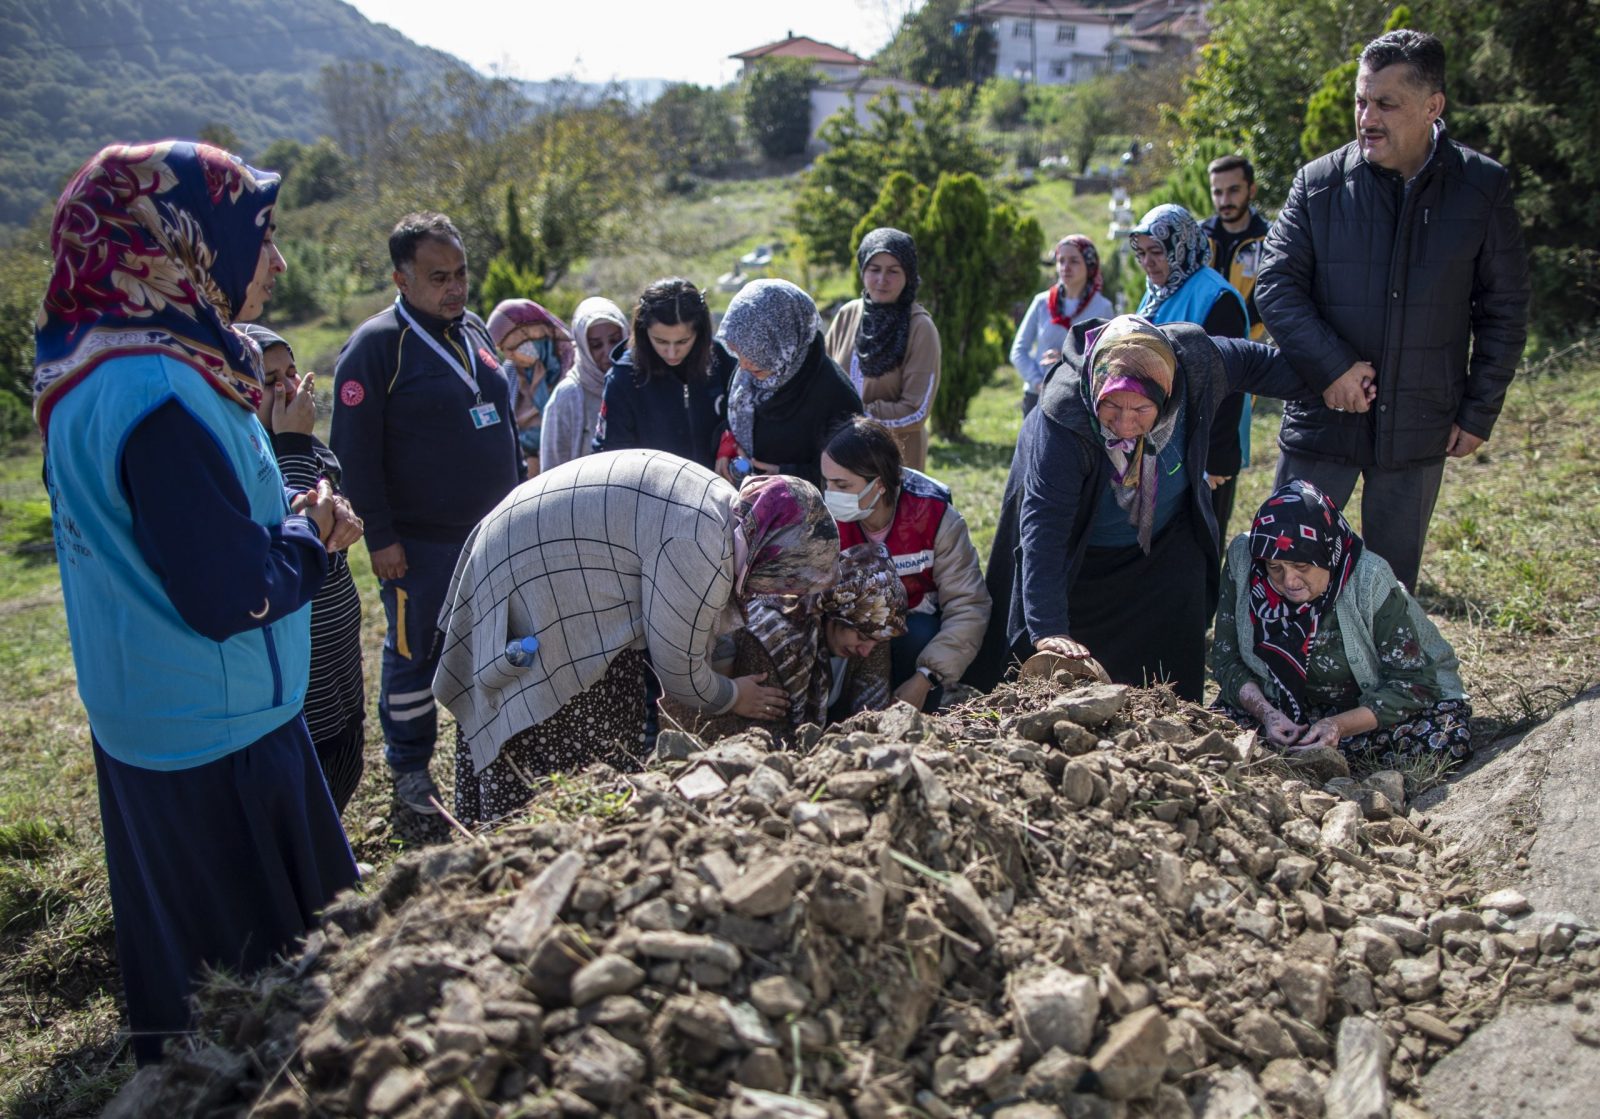 epa10245027 Elif Ayvaz (C), wife of coal mine blast victim Selcuk Ayvaz, reacts during his funeral ceremony in the town of Ugurlar near Bartin, Turkey, 15 October 2022. At least 40 people were killed and 11 others were injured in an explosion at a coal mine in Bartin, northern Turkey, on 14 October, the country's interior minister confirmed on 15 October 2022.  EPA/ERDEM SAHIN